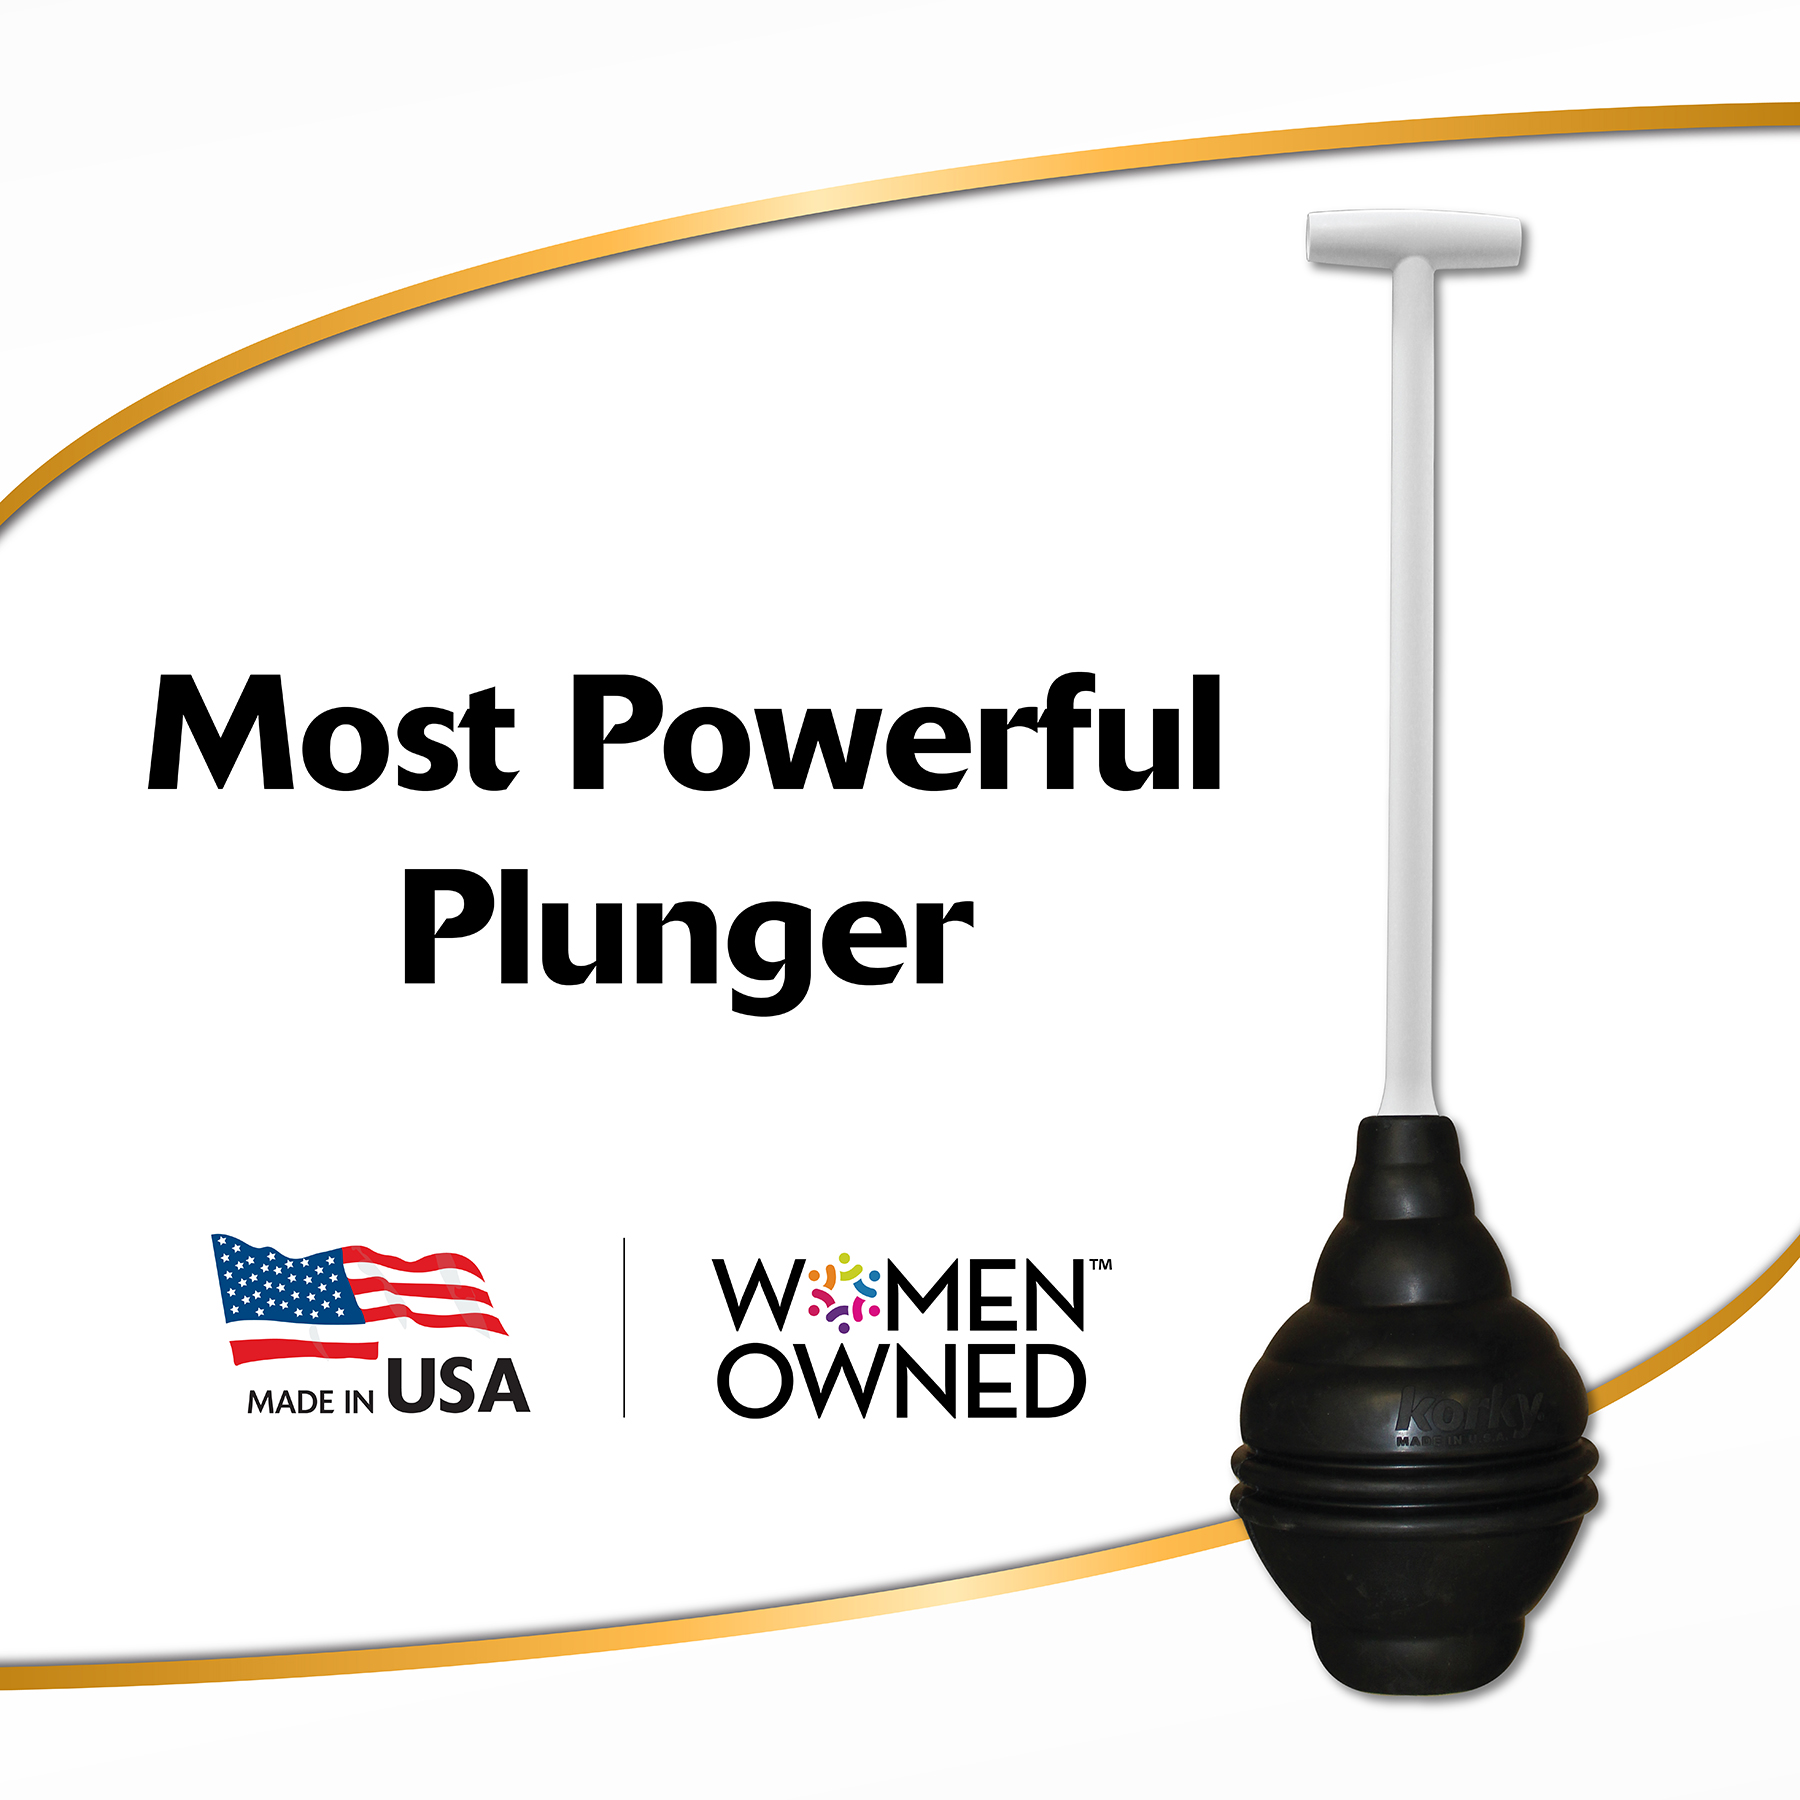 Beehive Max is the most powerful plunger